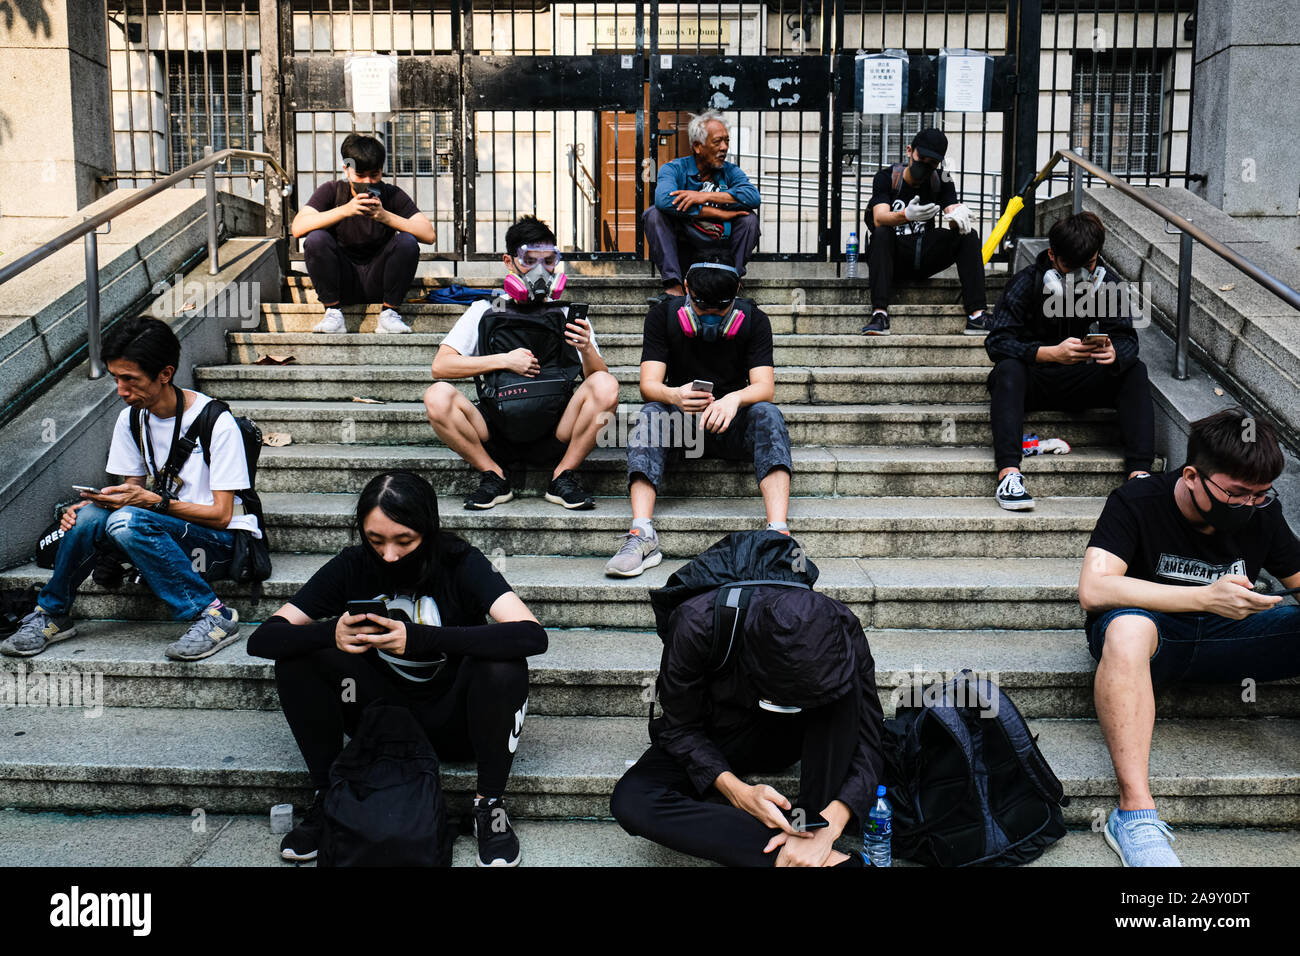 Hong Kong, China. 18th Nov, 2019. Protesters take a rest during a protest in Jordan district of Hong Kong, China. As a standoff continued in Hong Kong, protesters clashed with police near Hong Kong Polytechnic University in Kowloon, leading to multiple arrests and injuries. Credit: Keith Tsuji/ZUMA Wire/Alamy Live News Stock Photo